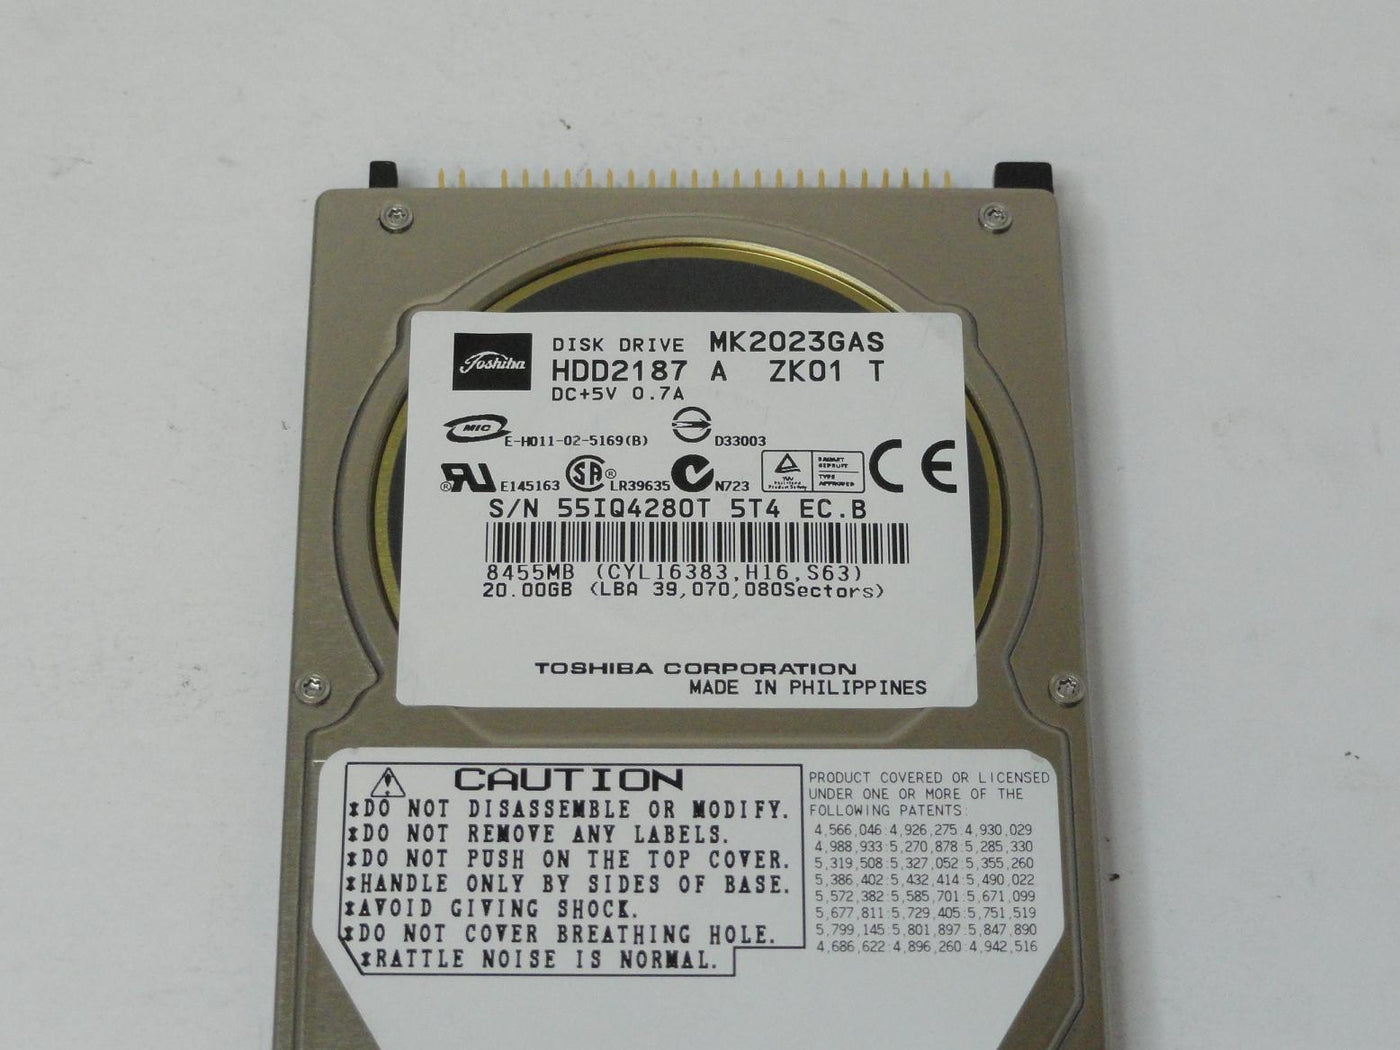 PR14904_HDD2187_Toshiba HP 20GB IDE 4200rpm 2.5in HDD - Image2